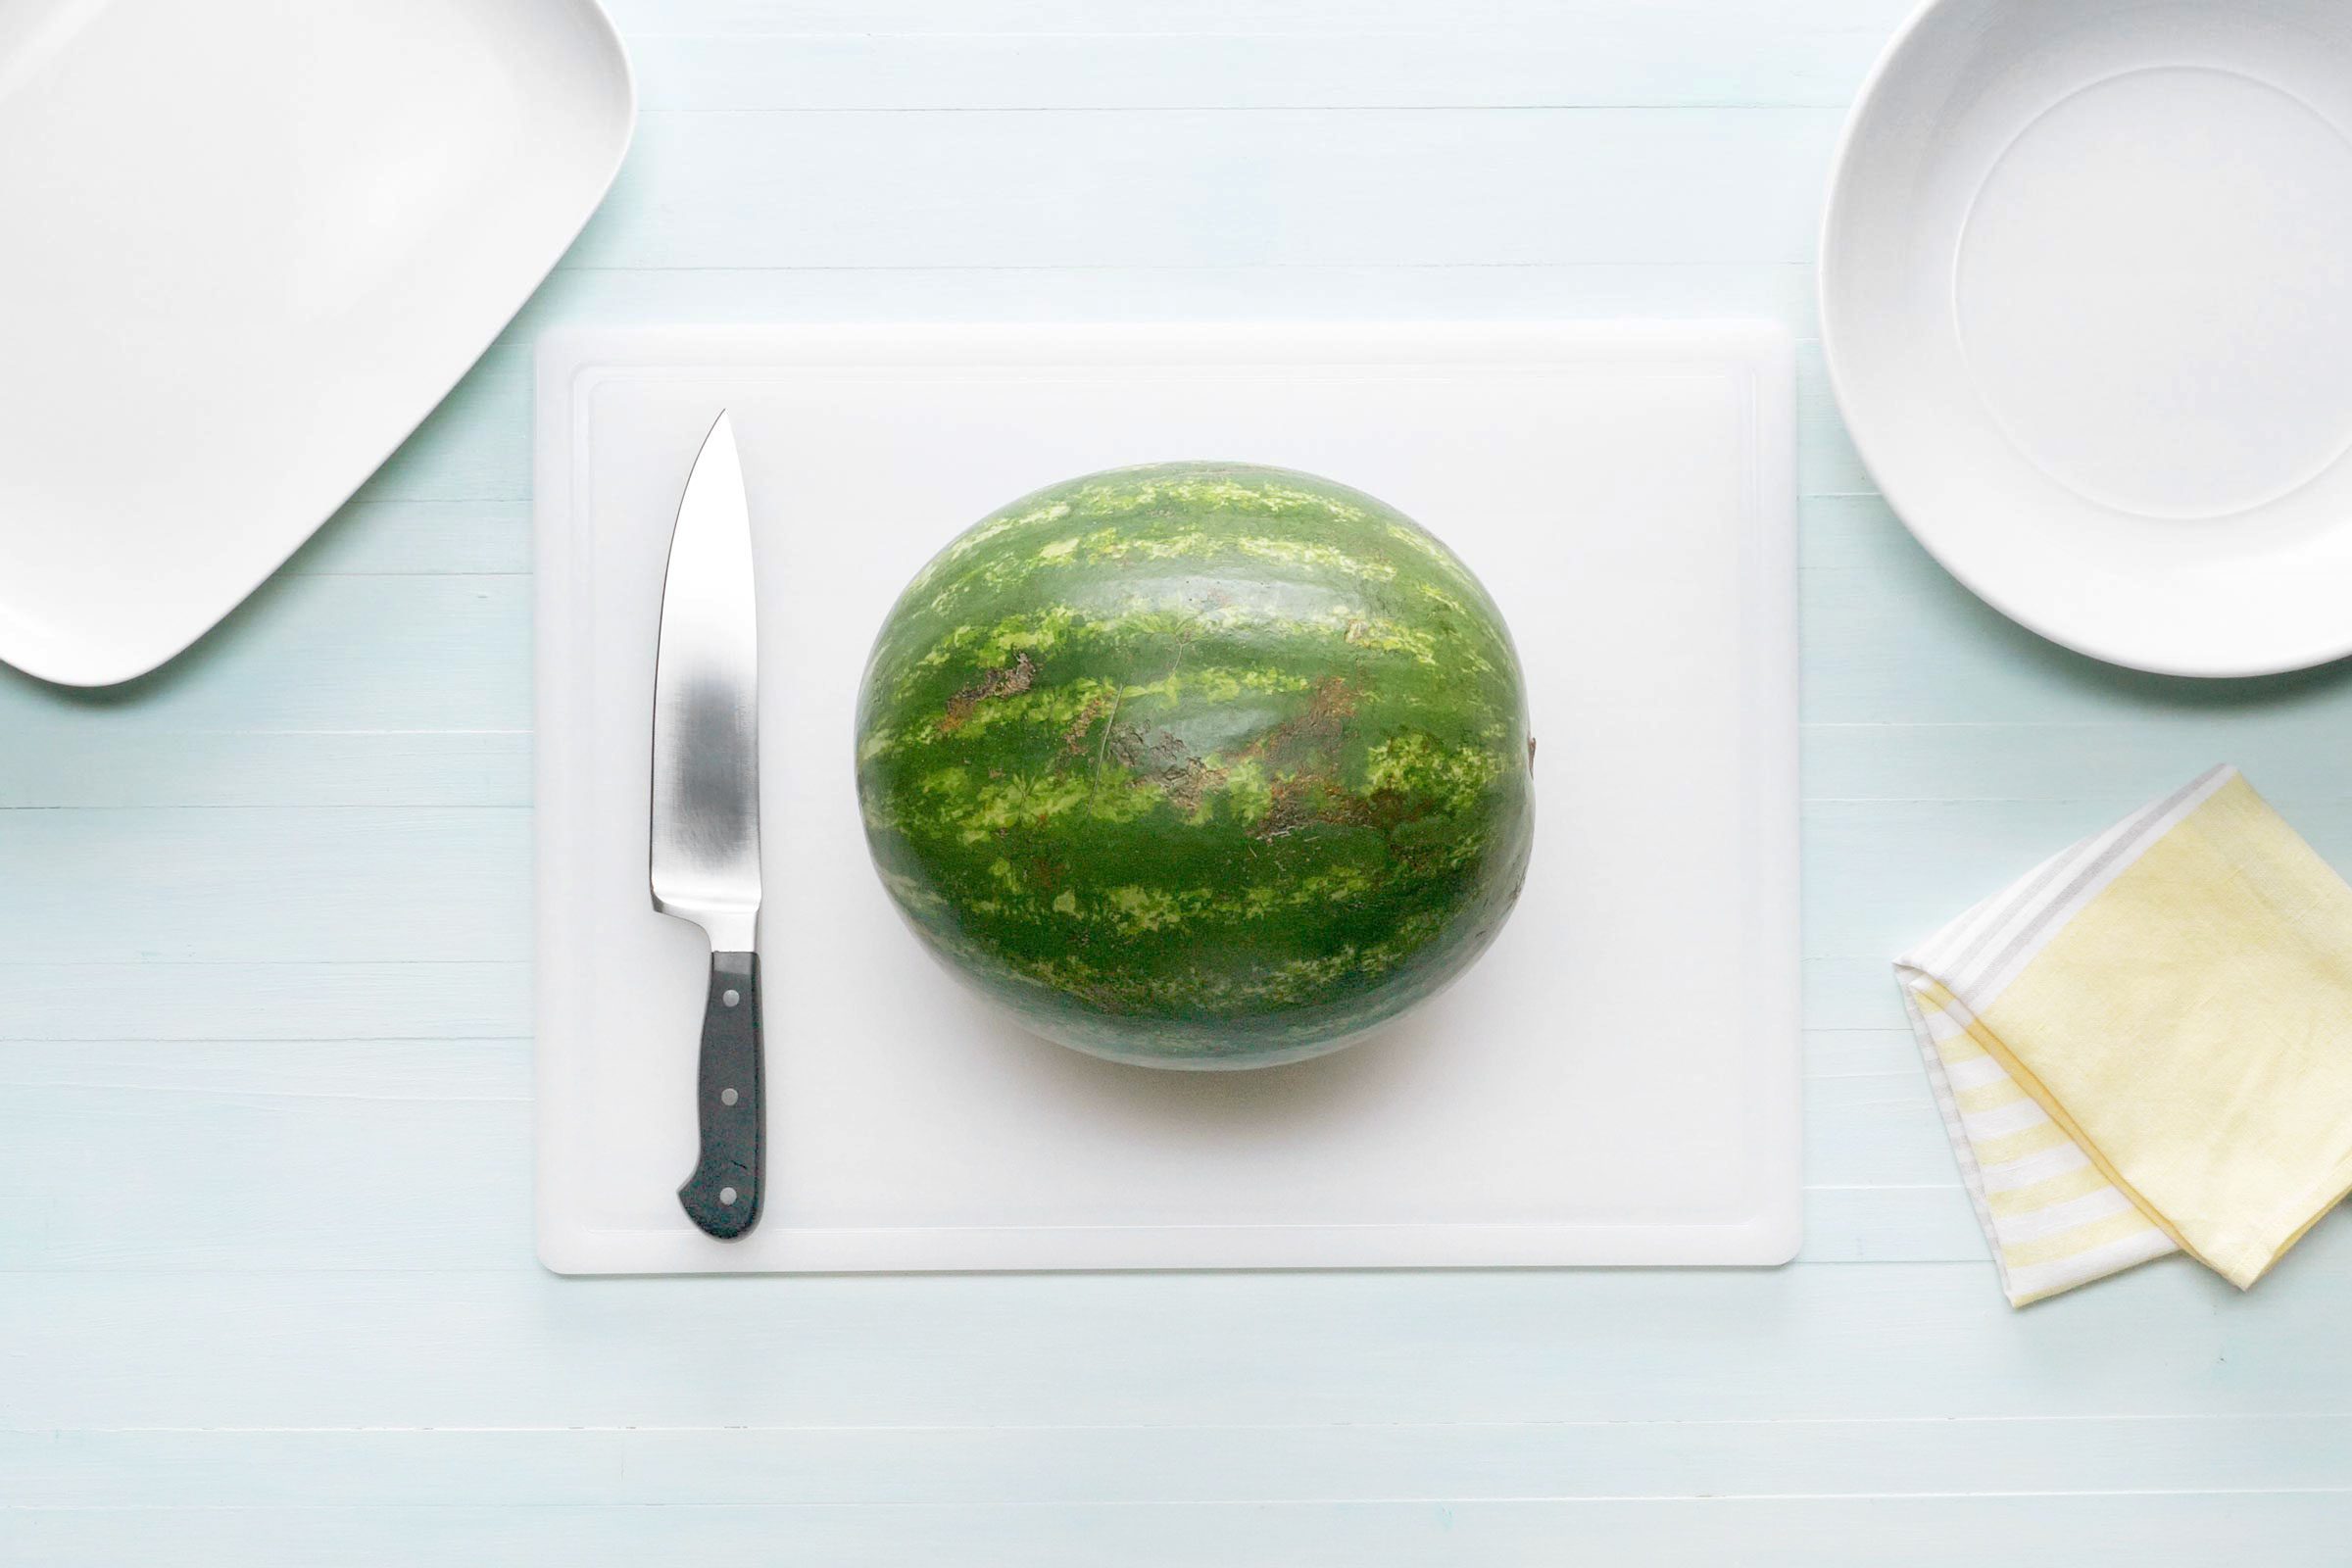  How to Cut a Watermelon into Slices, Cubes or Sticks